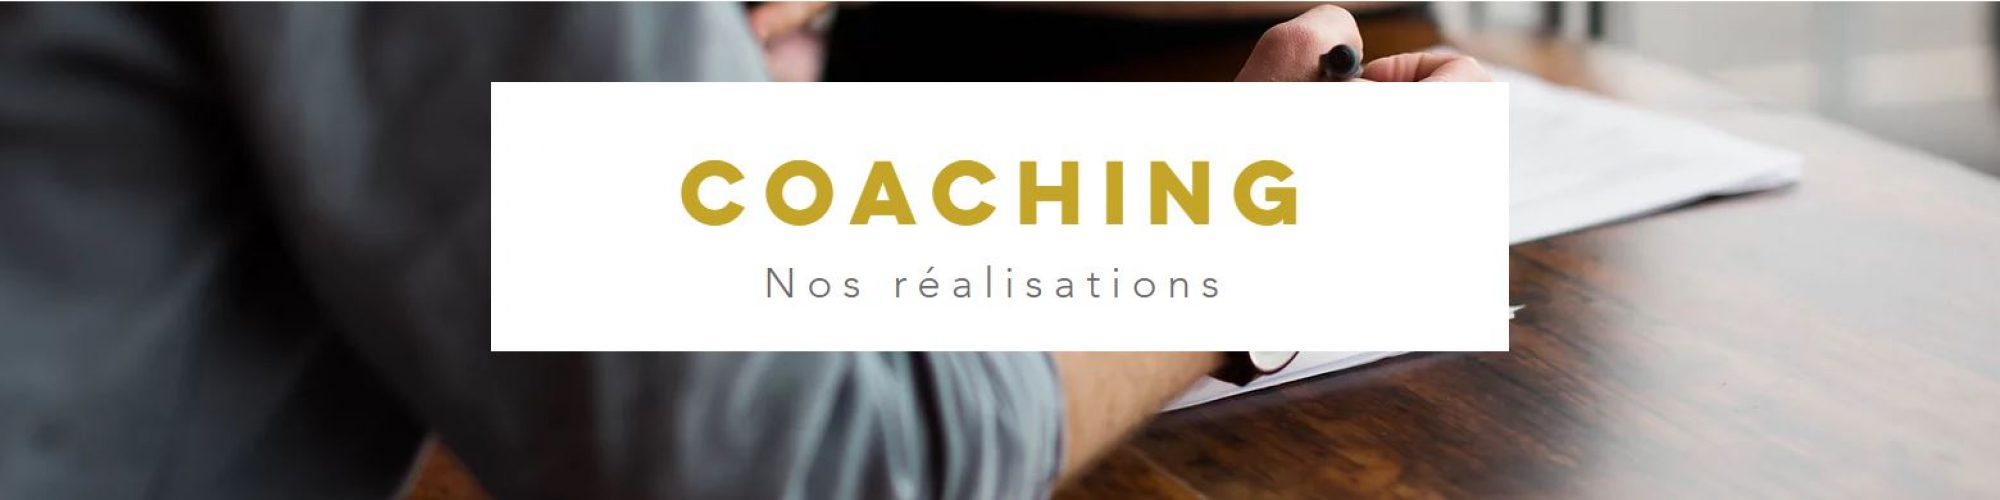 realisations coaching cecileboury